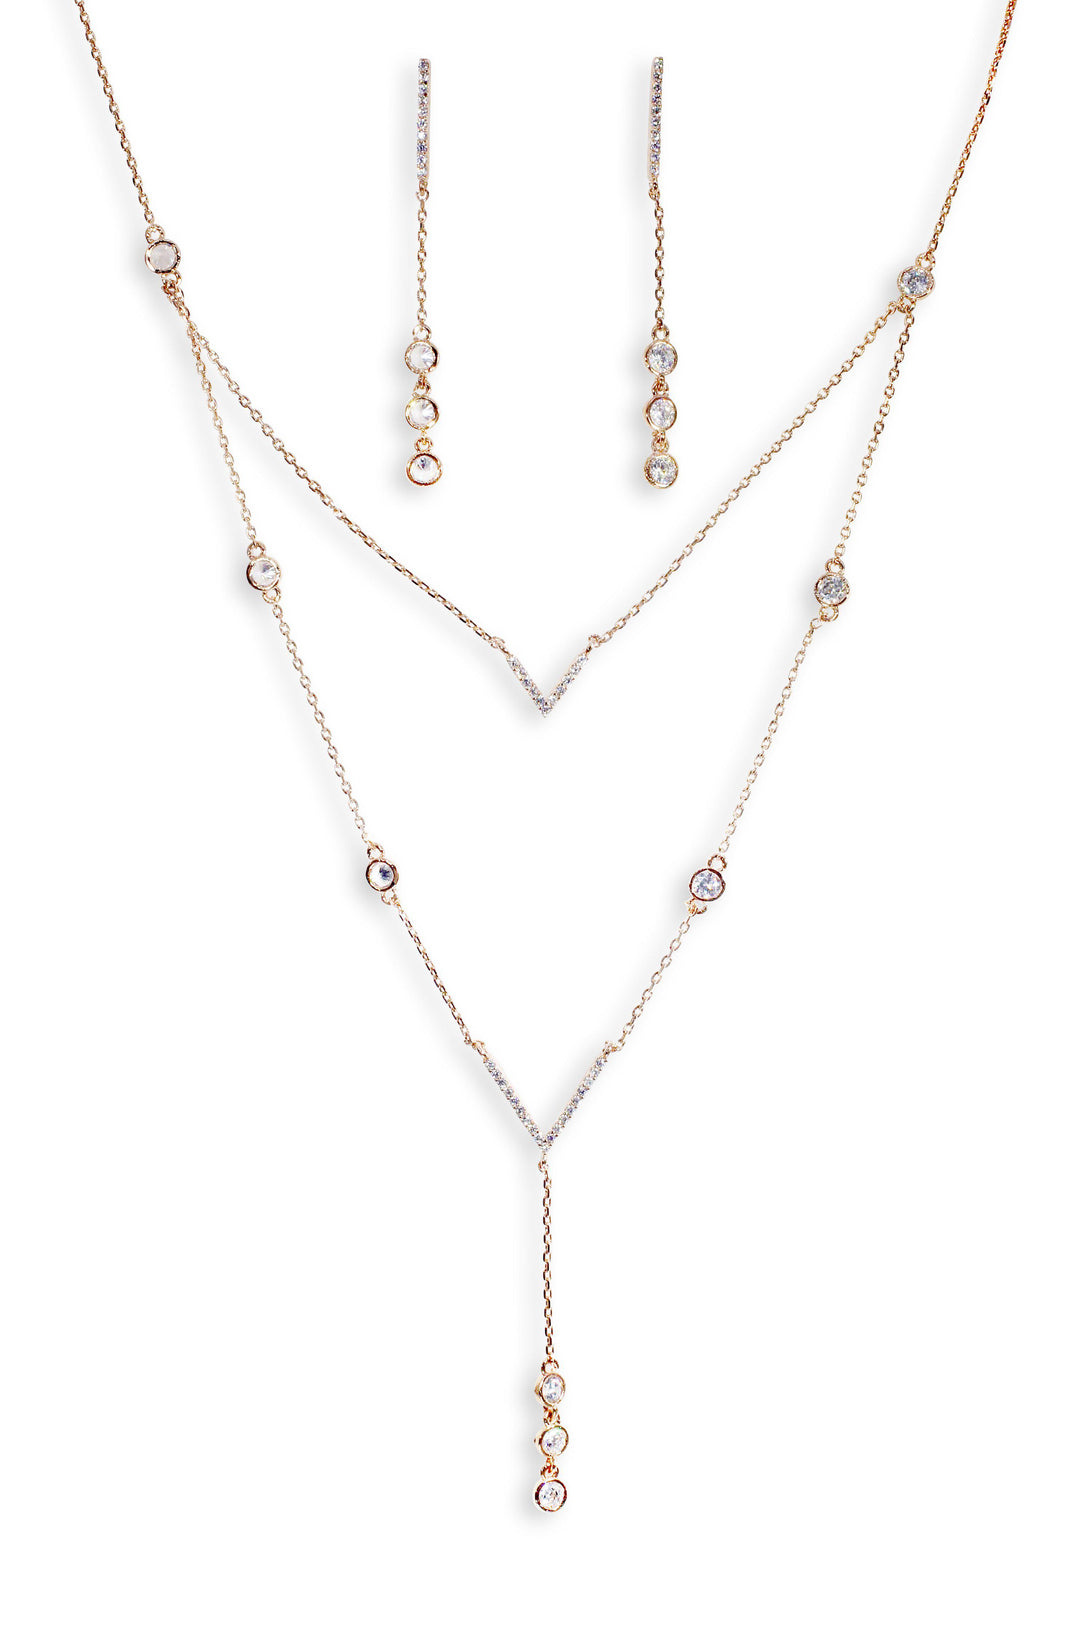 Noble Set Circle-Chained Drops in Gold Plating (Earrings, Necklace)